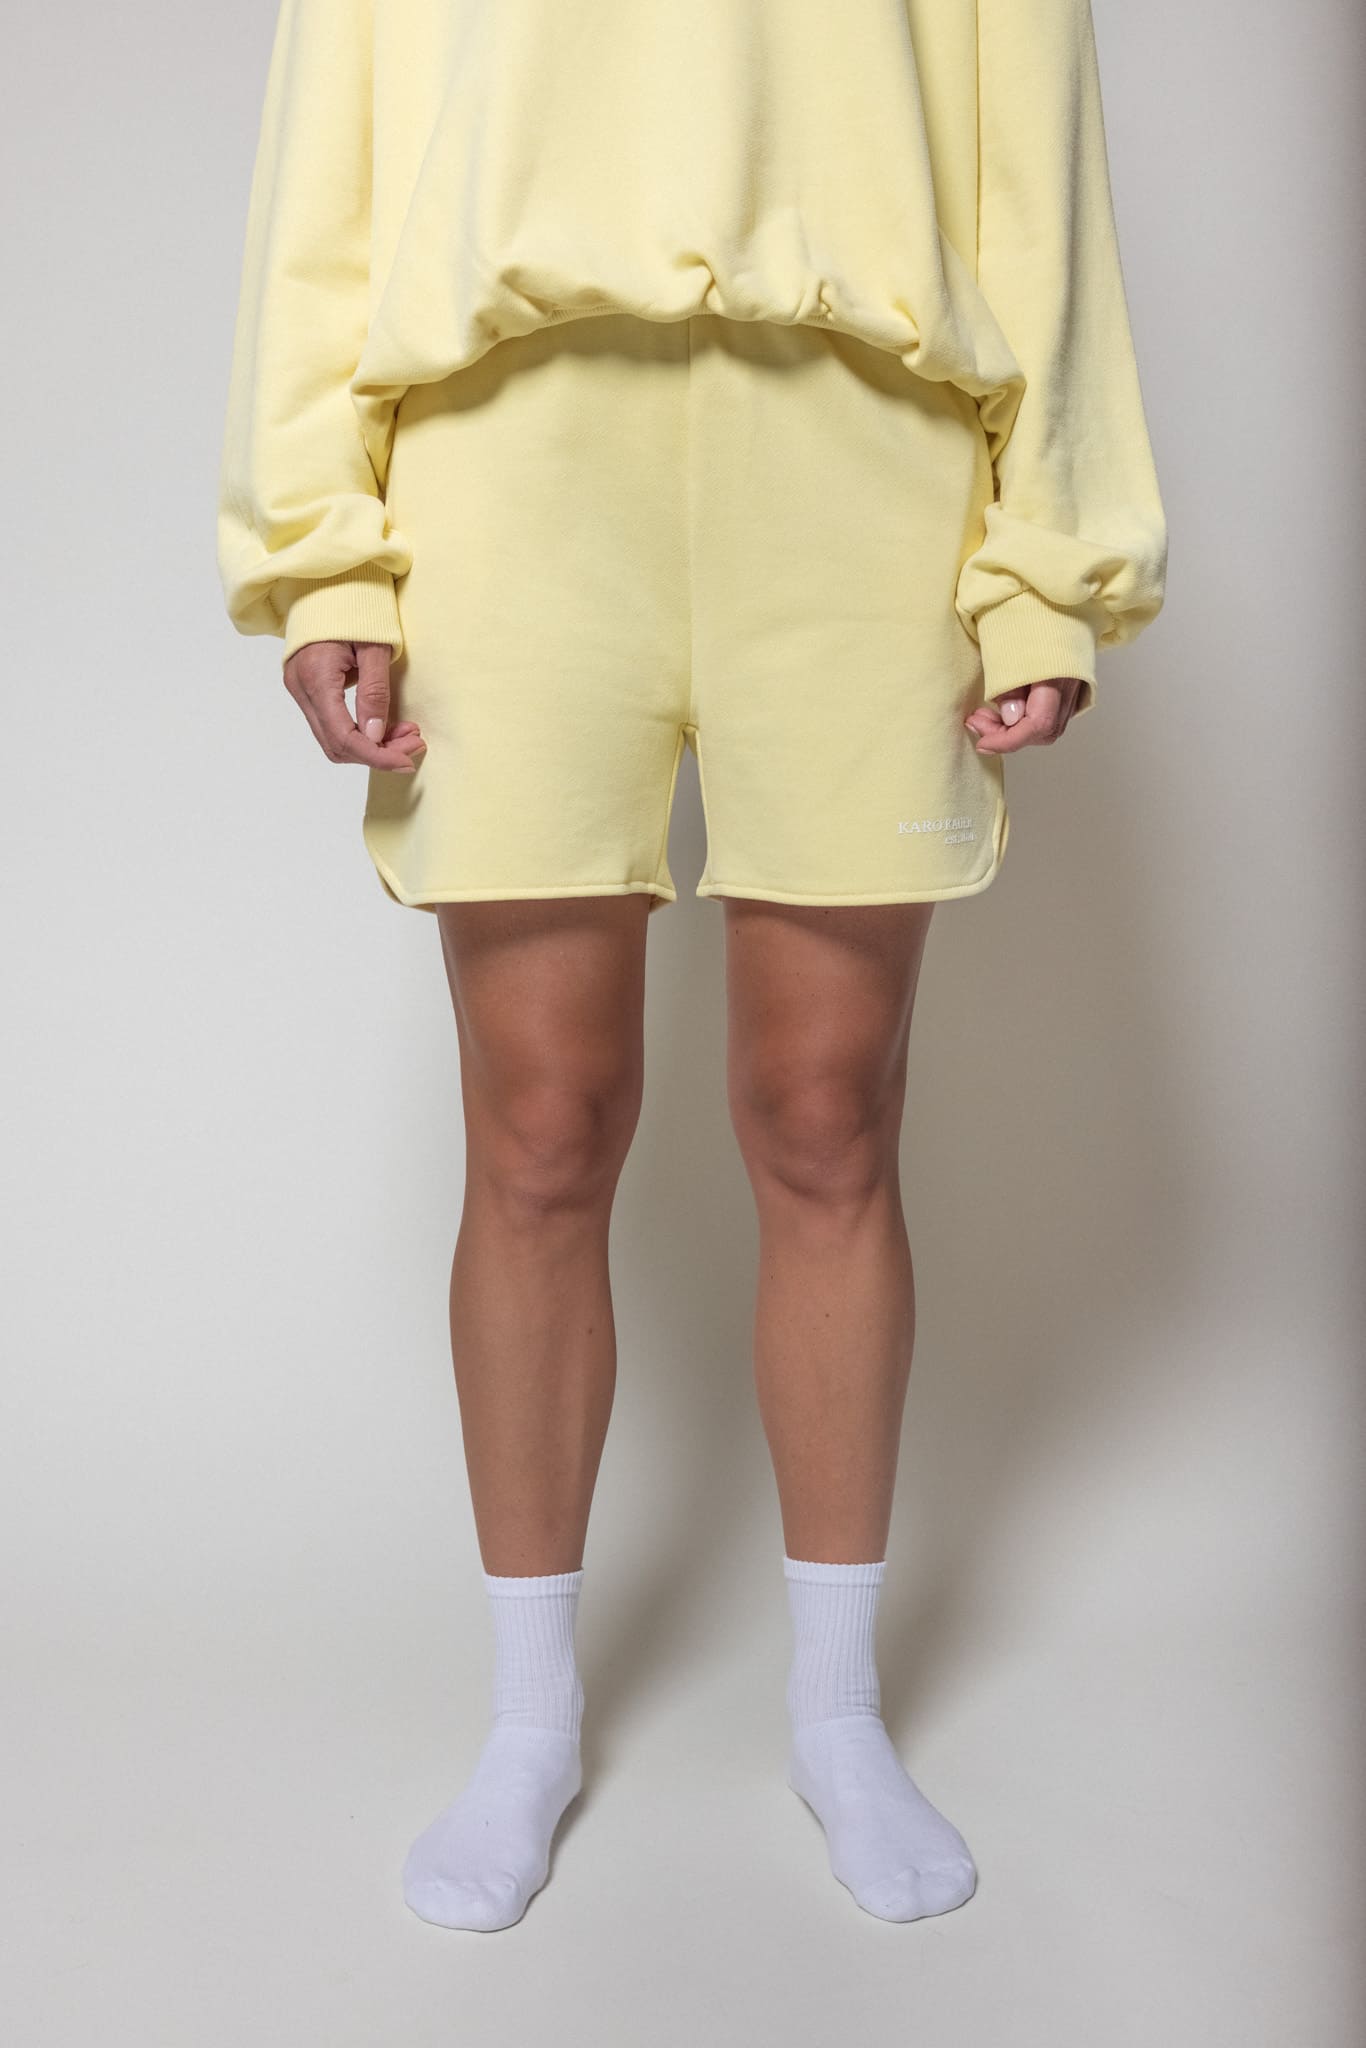 Lucy Shorts Yellow